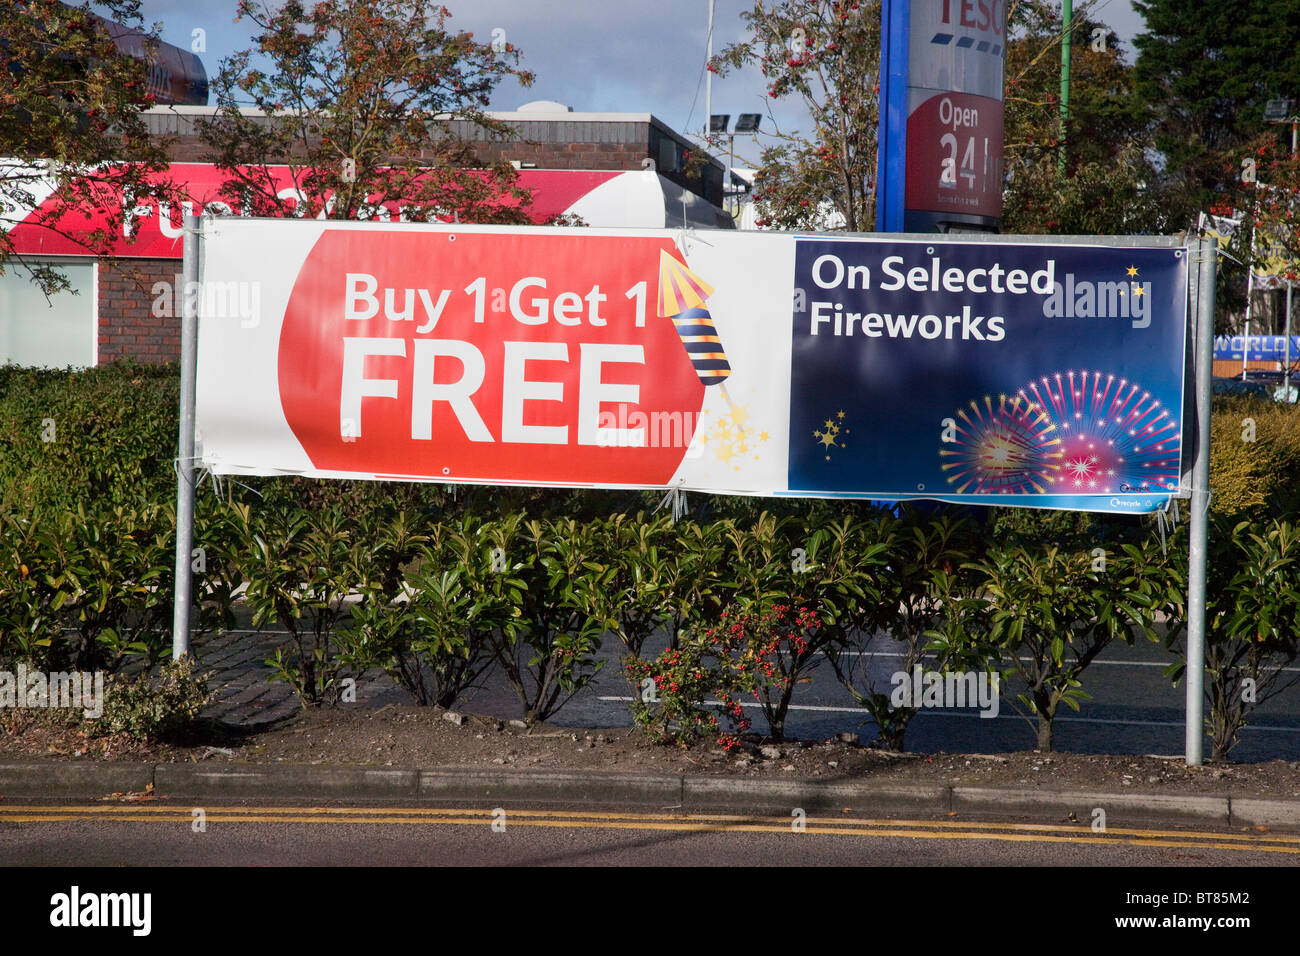 BOGOF   Buy One Get one free sign on selected fireworks at Tesco Formby, Merseyside, UK Foto Stock